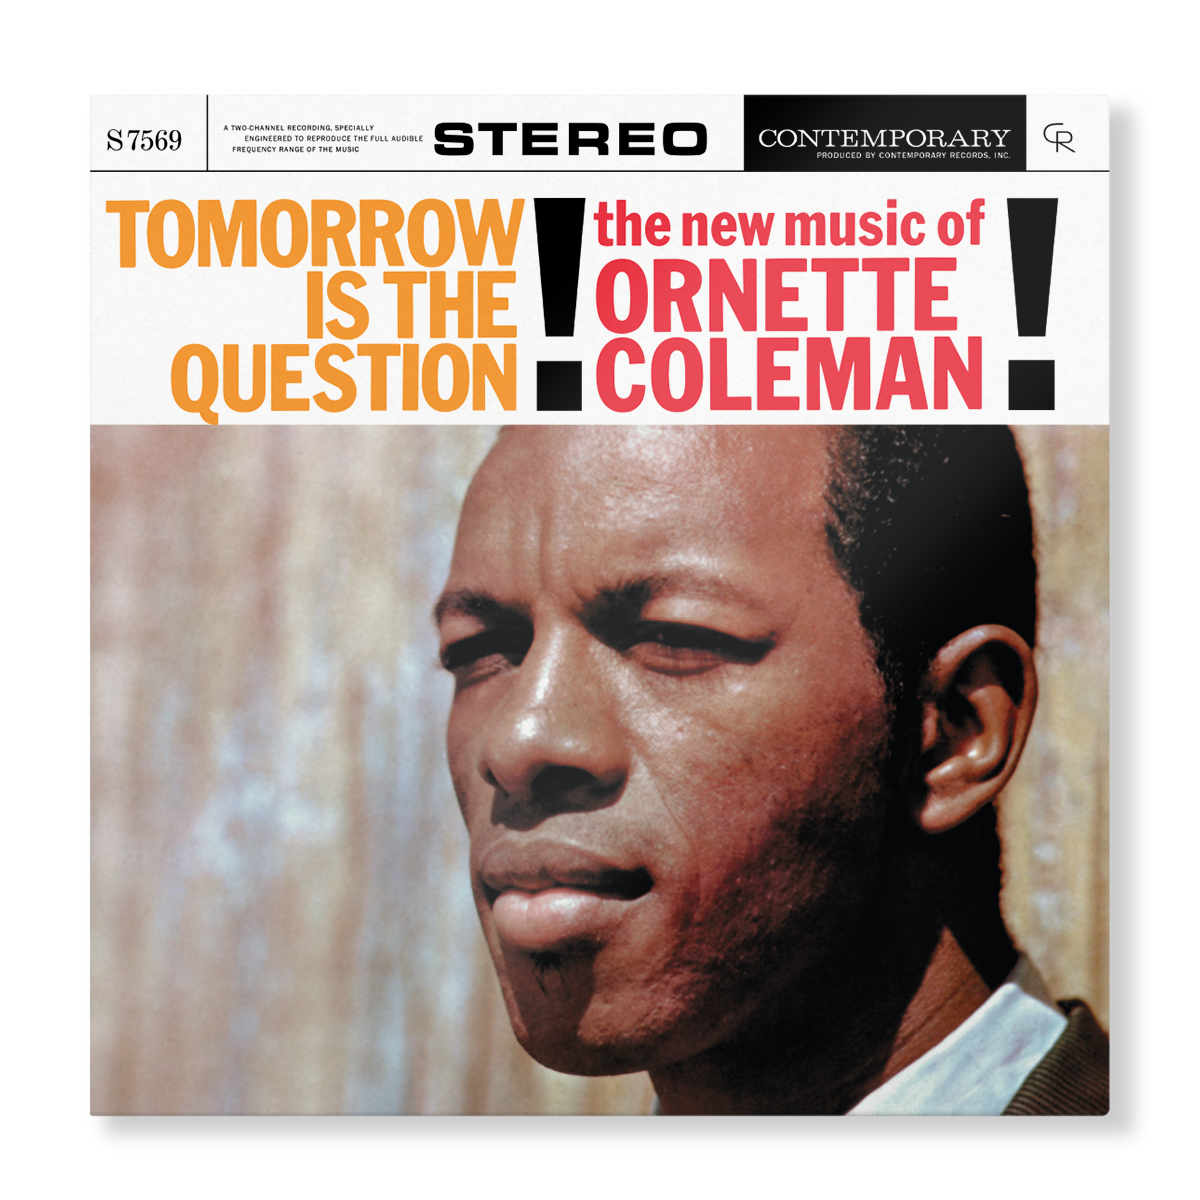 Tomorrow is the Question! (SACD - Craft Exclusive)